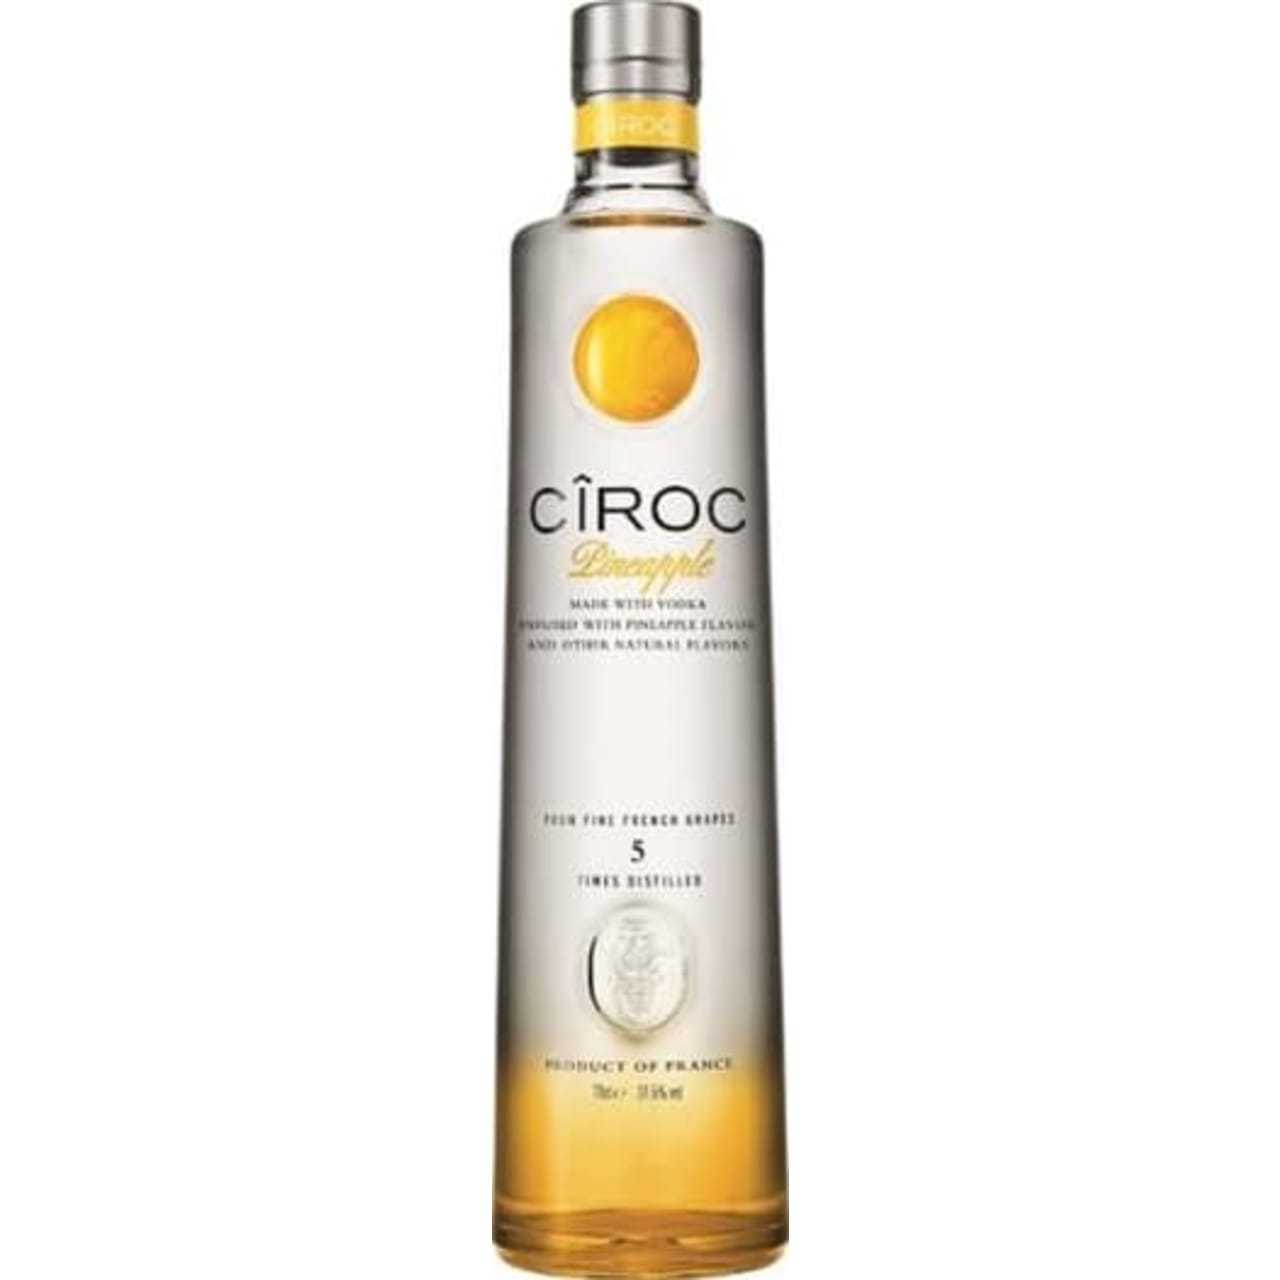 CÎROC Pineapple is infused with the delicate natural flavours of fresh, crushed pineapple.